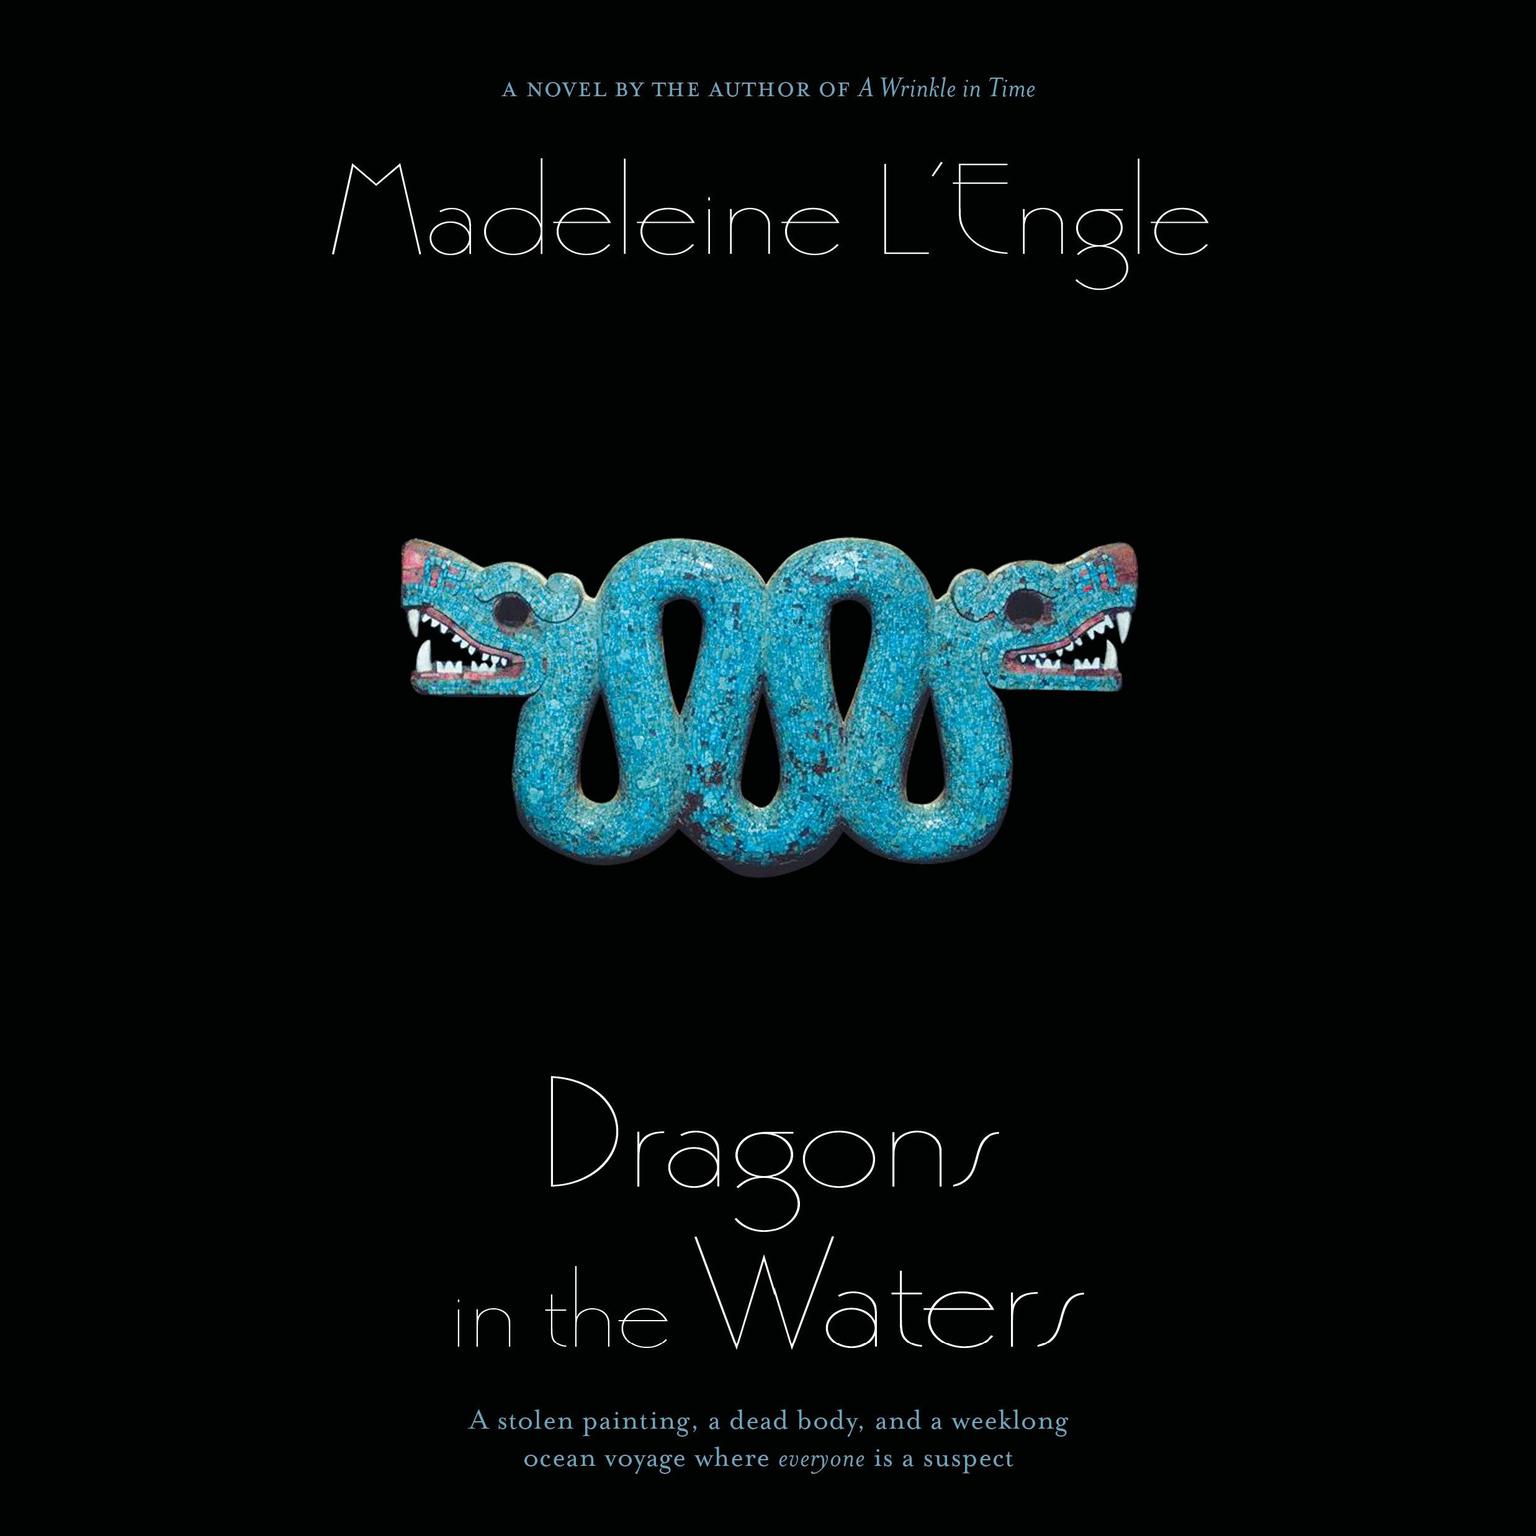 Dragons in the Waters Audiobook, by Madeleine L’Engle